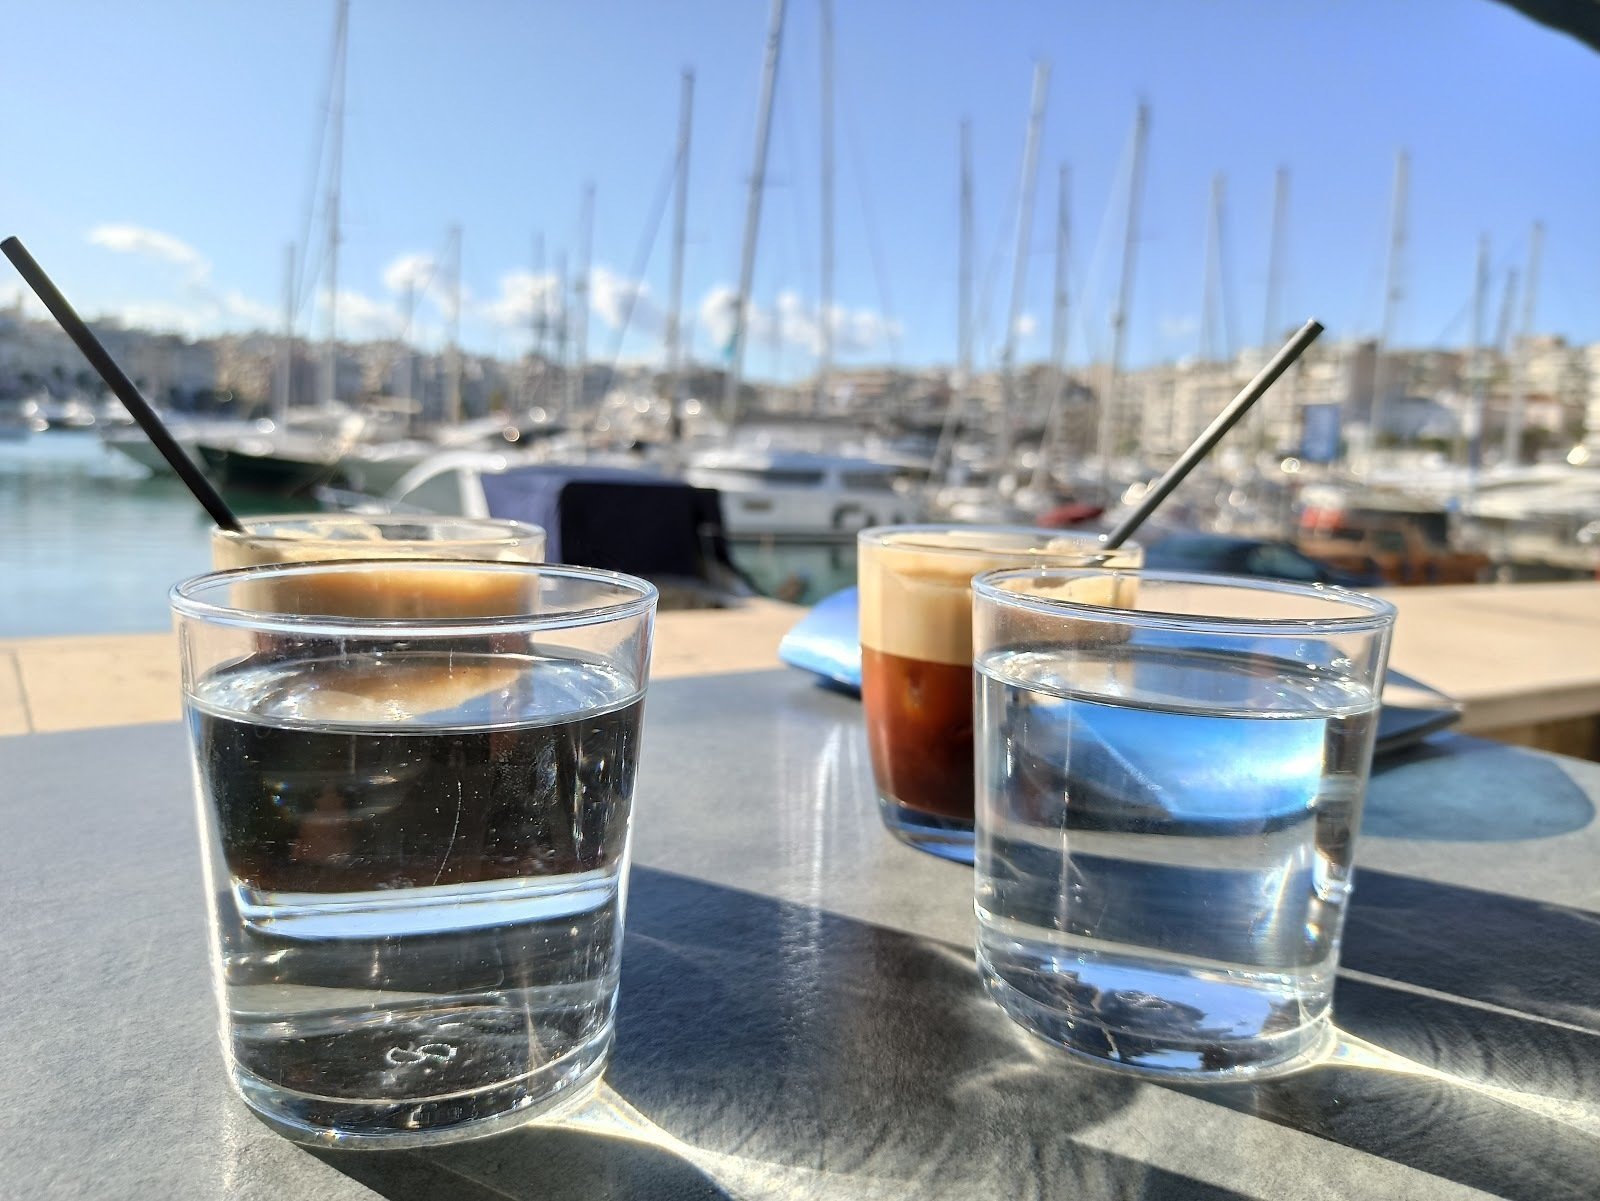 <span class="translation_missing" title="translation missing: en.meta.location_title, location_name: yacht cafe / γιώτ καφέ, city: Athens">Location Title</span>